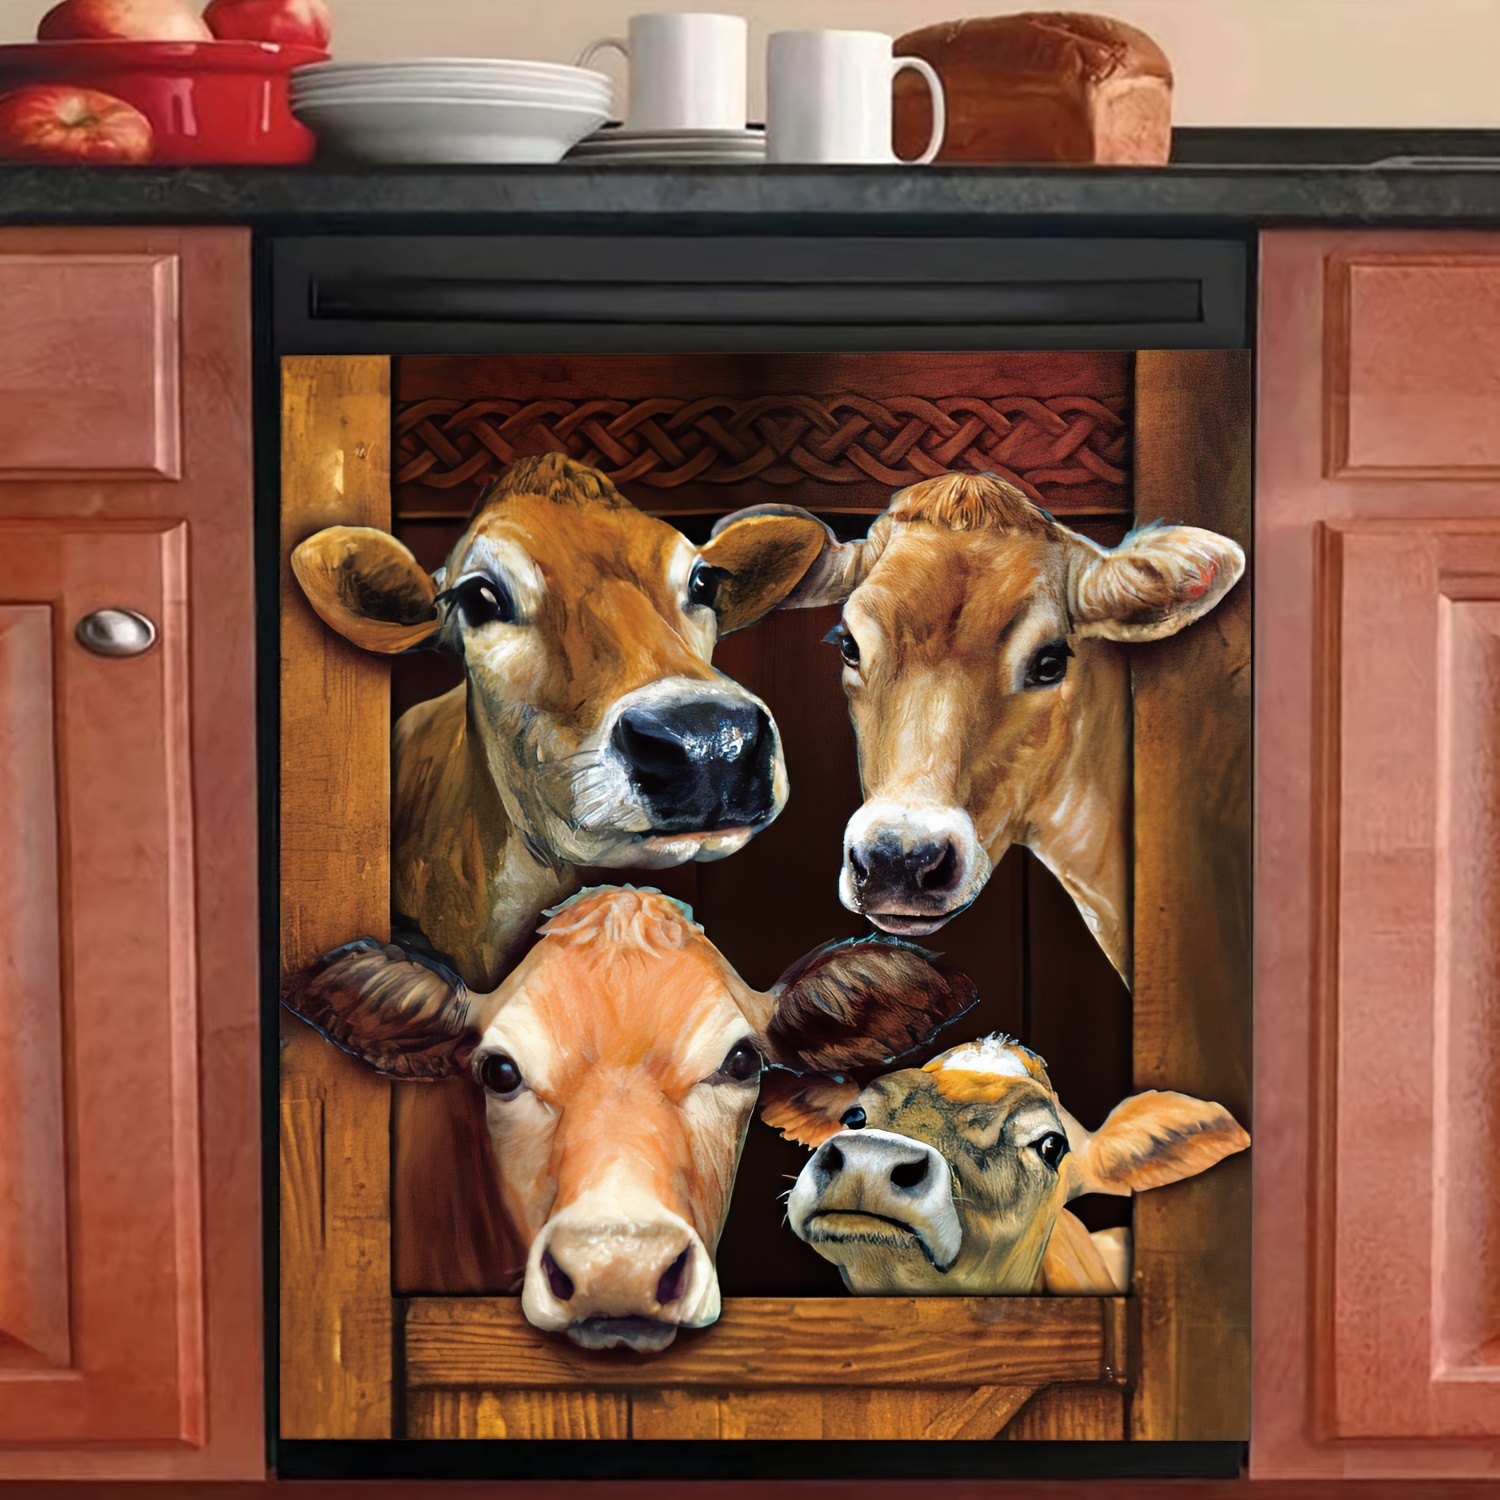 

1pc Rustic Farm Animal Dishwasher Magnet Cover, Vinyl Magnetic Decal For Kitchen Appliance, Cow Art, Fits Stainless Steel Refrigerator Door, Removable